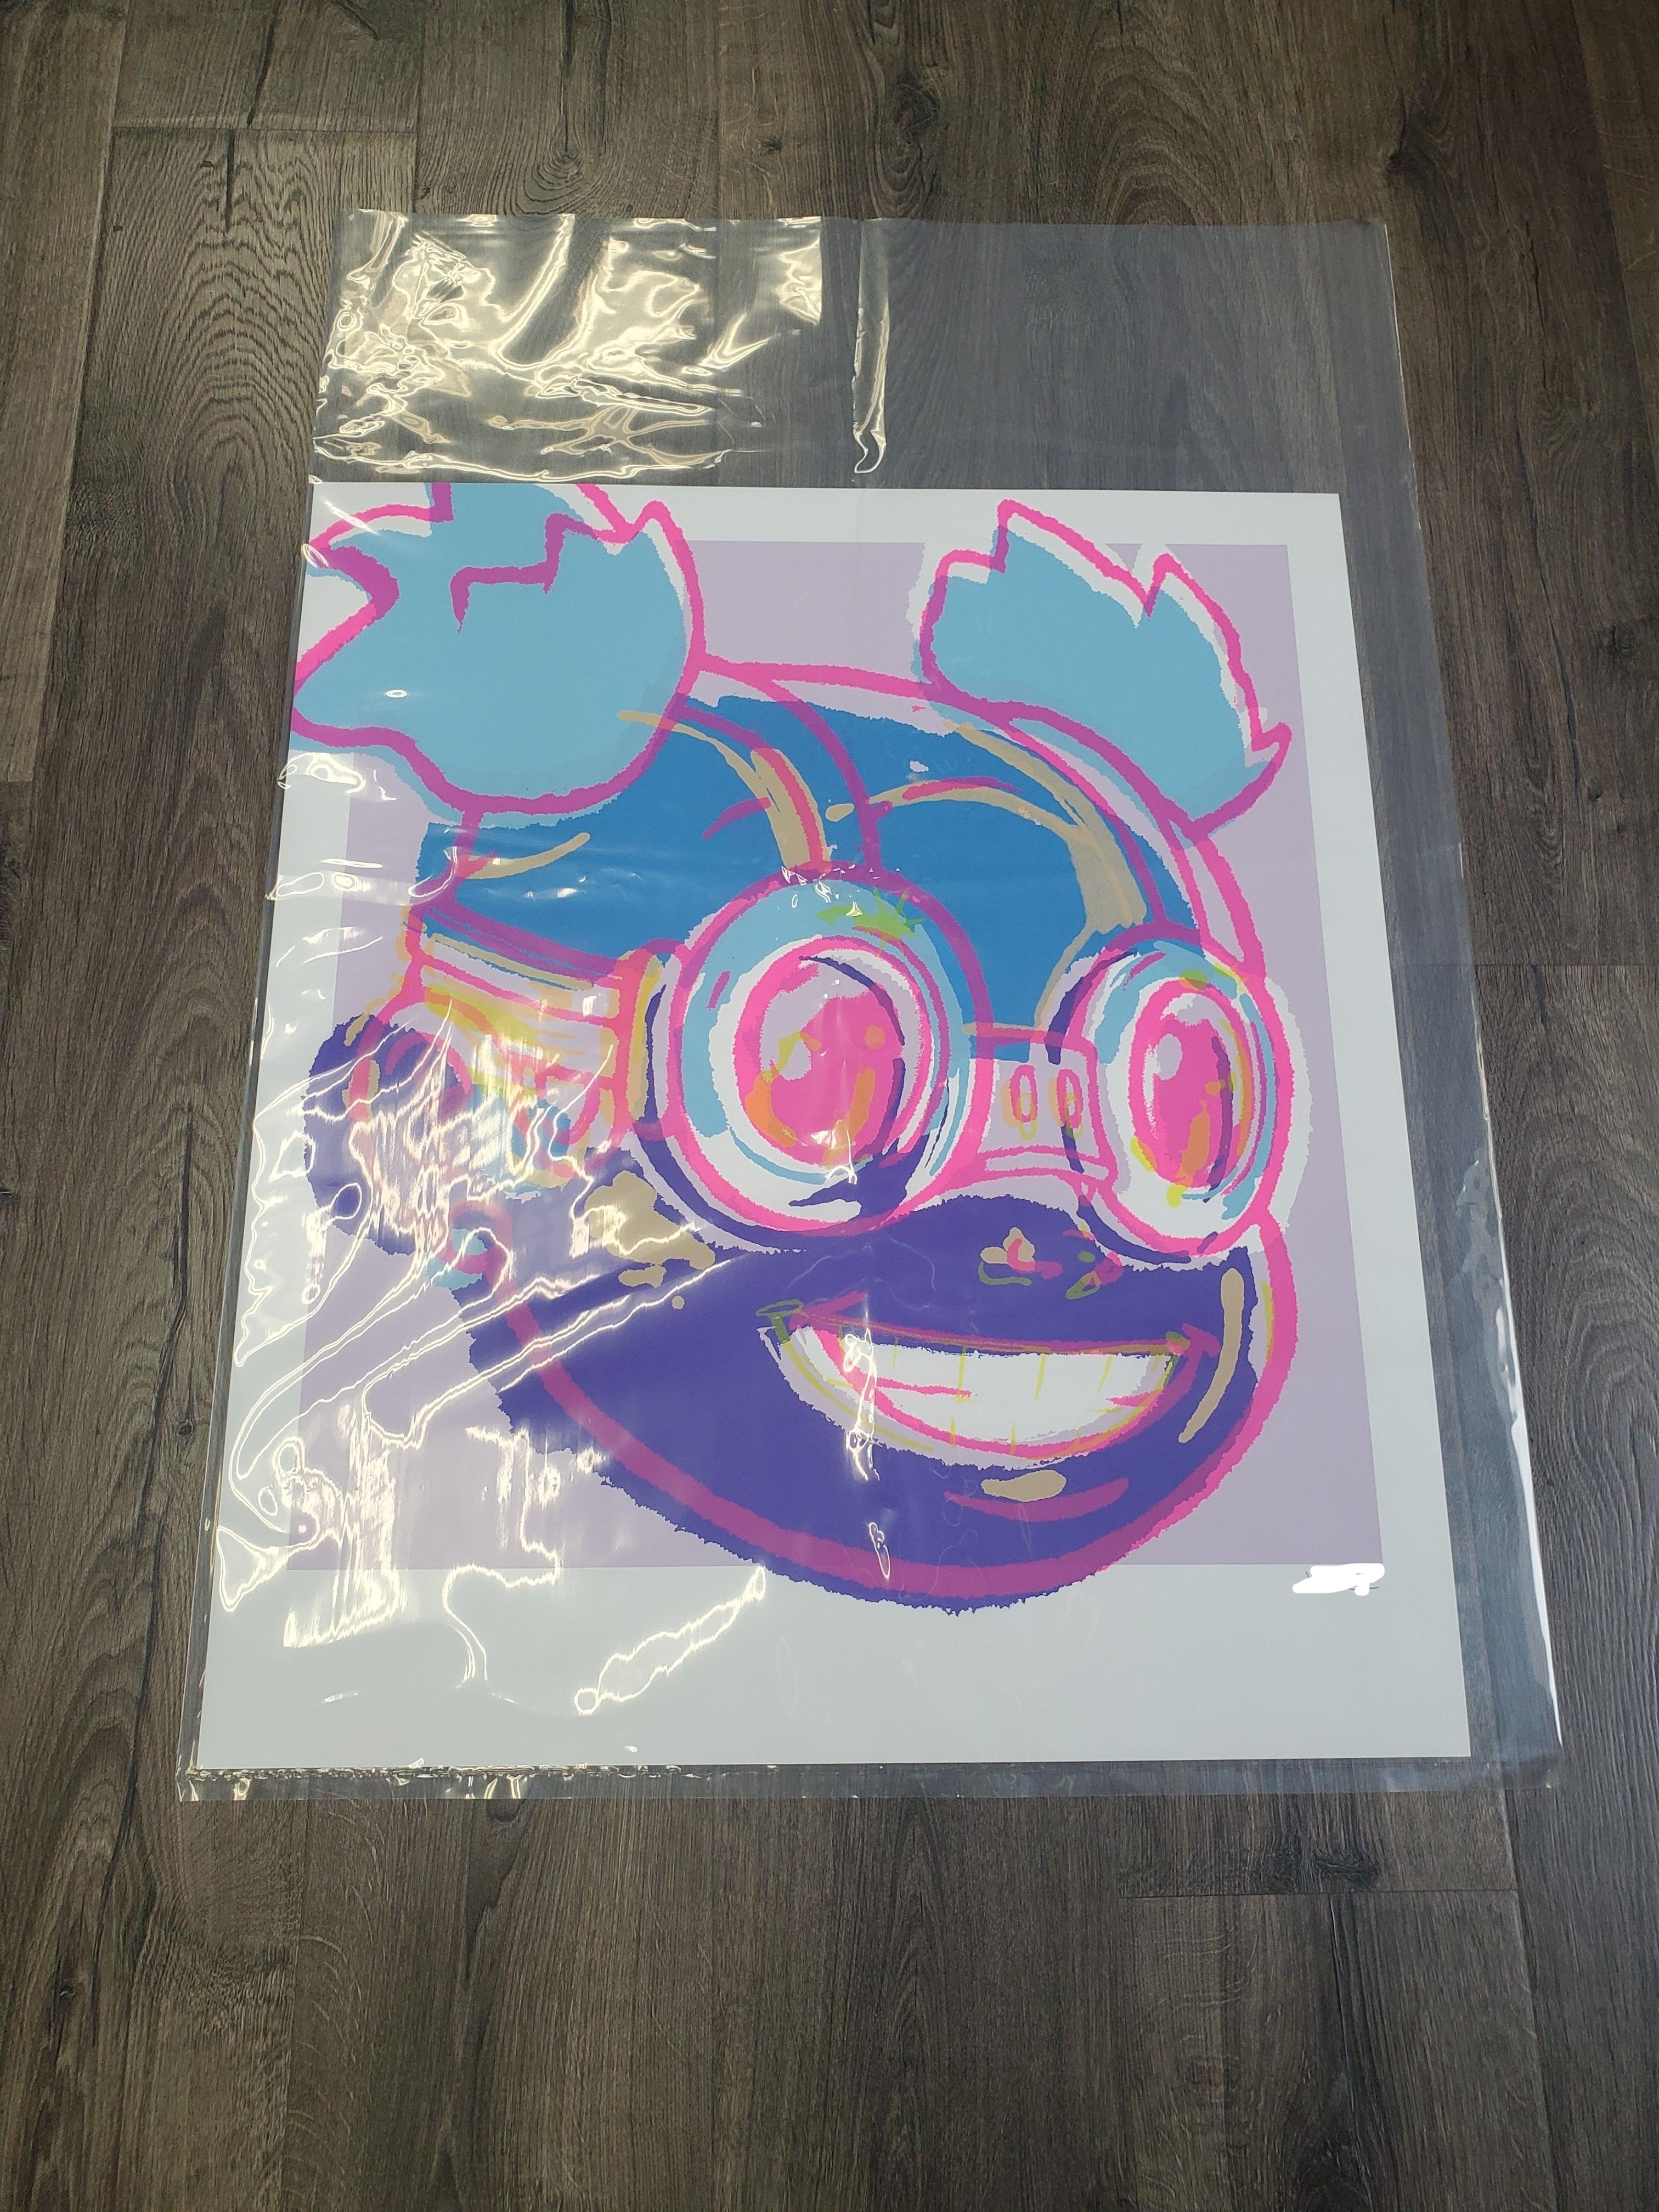 Title: "LILAC TURQUOISE" Poster artist: Hebru Brantley Edition: xx/15 Type: Screen Print Size: 24" x 28" Location: Venue: Notes: SIGNED AND ROMAN NUMERAL EDITION OF 15  ONLY AVAILABLE AT STORE DAY OF.  SHIPS TODAY!